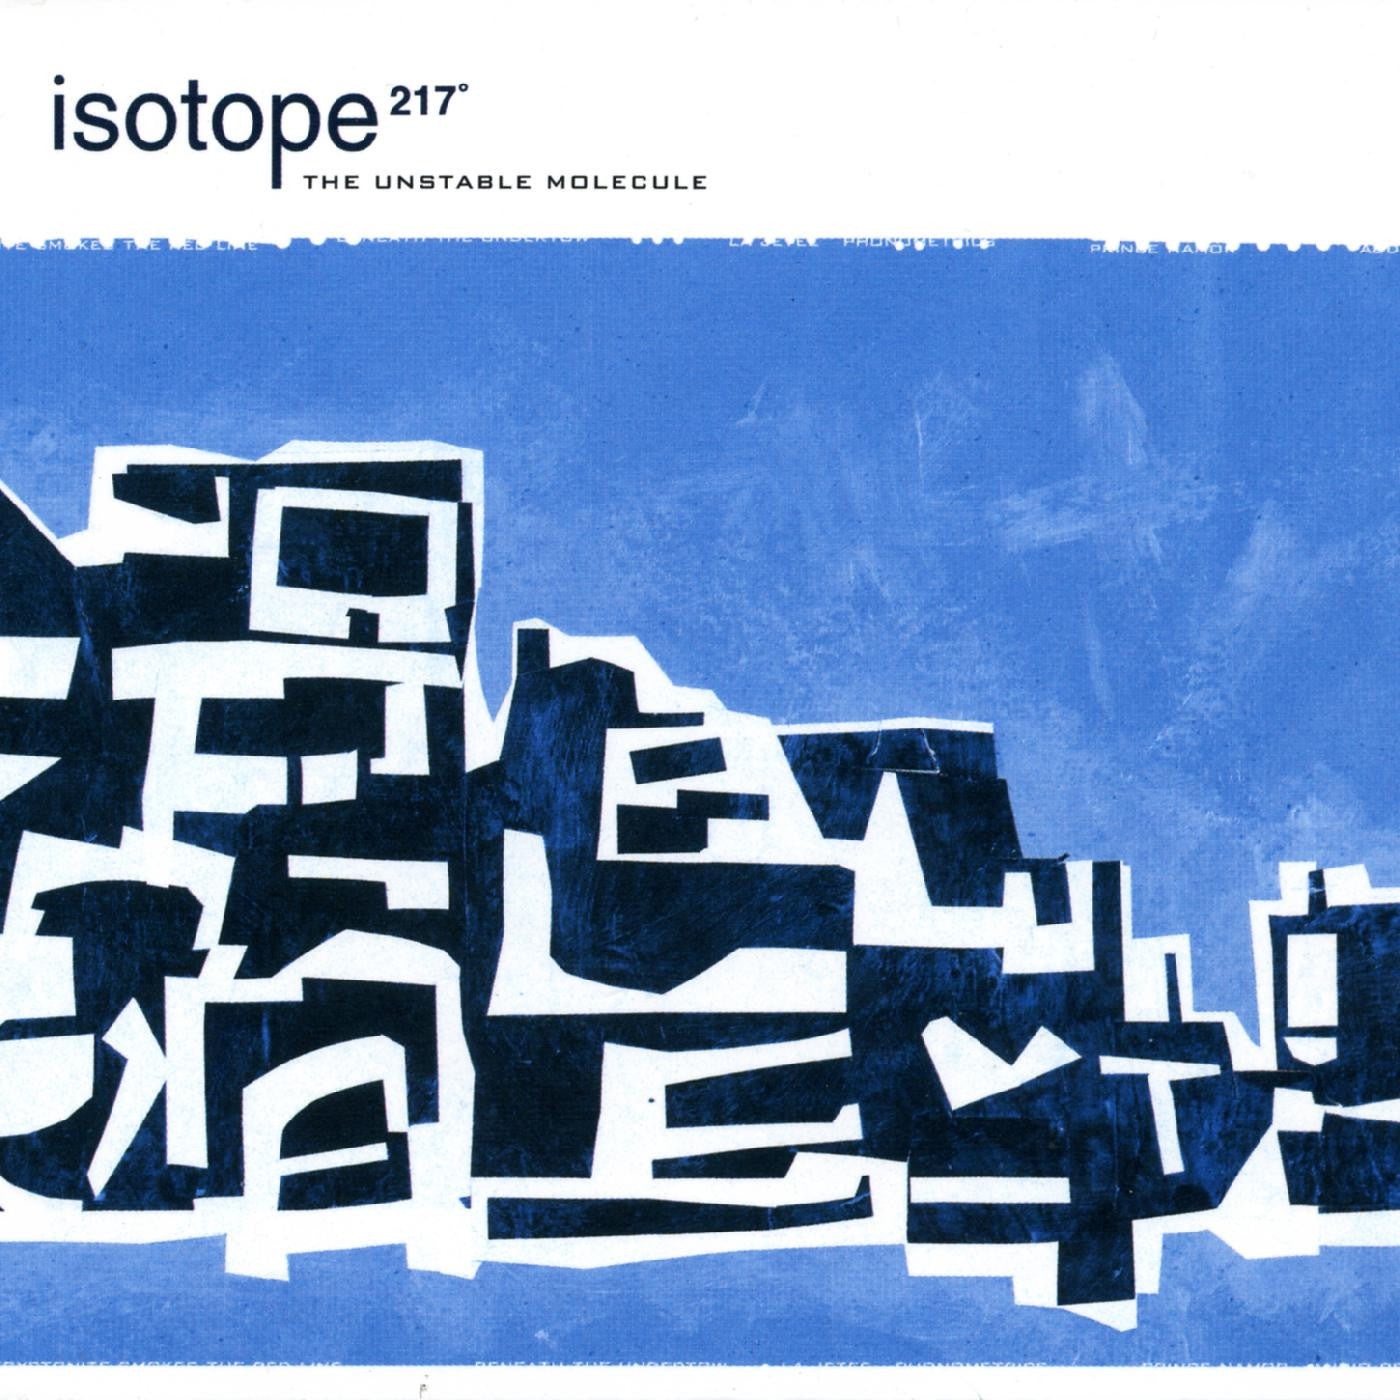 Isotope 217° – The Unstable Molecule (1997) - New LP Record 2022 Thrill Jockey Indie Exclusive Blue Vinyl - Local Chicago / Electronic / Future Jazz